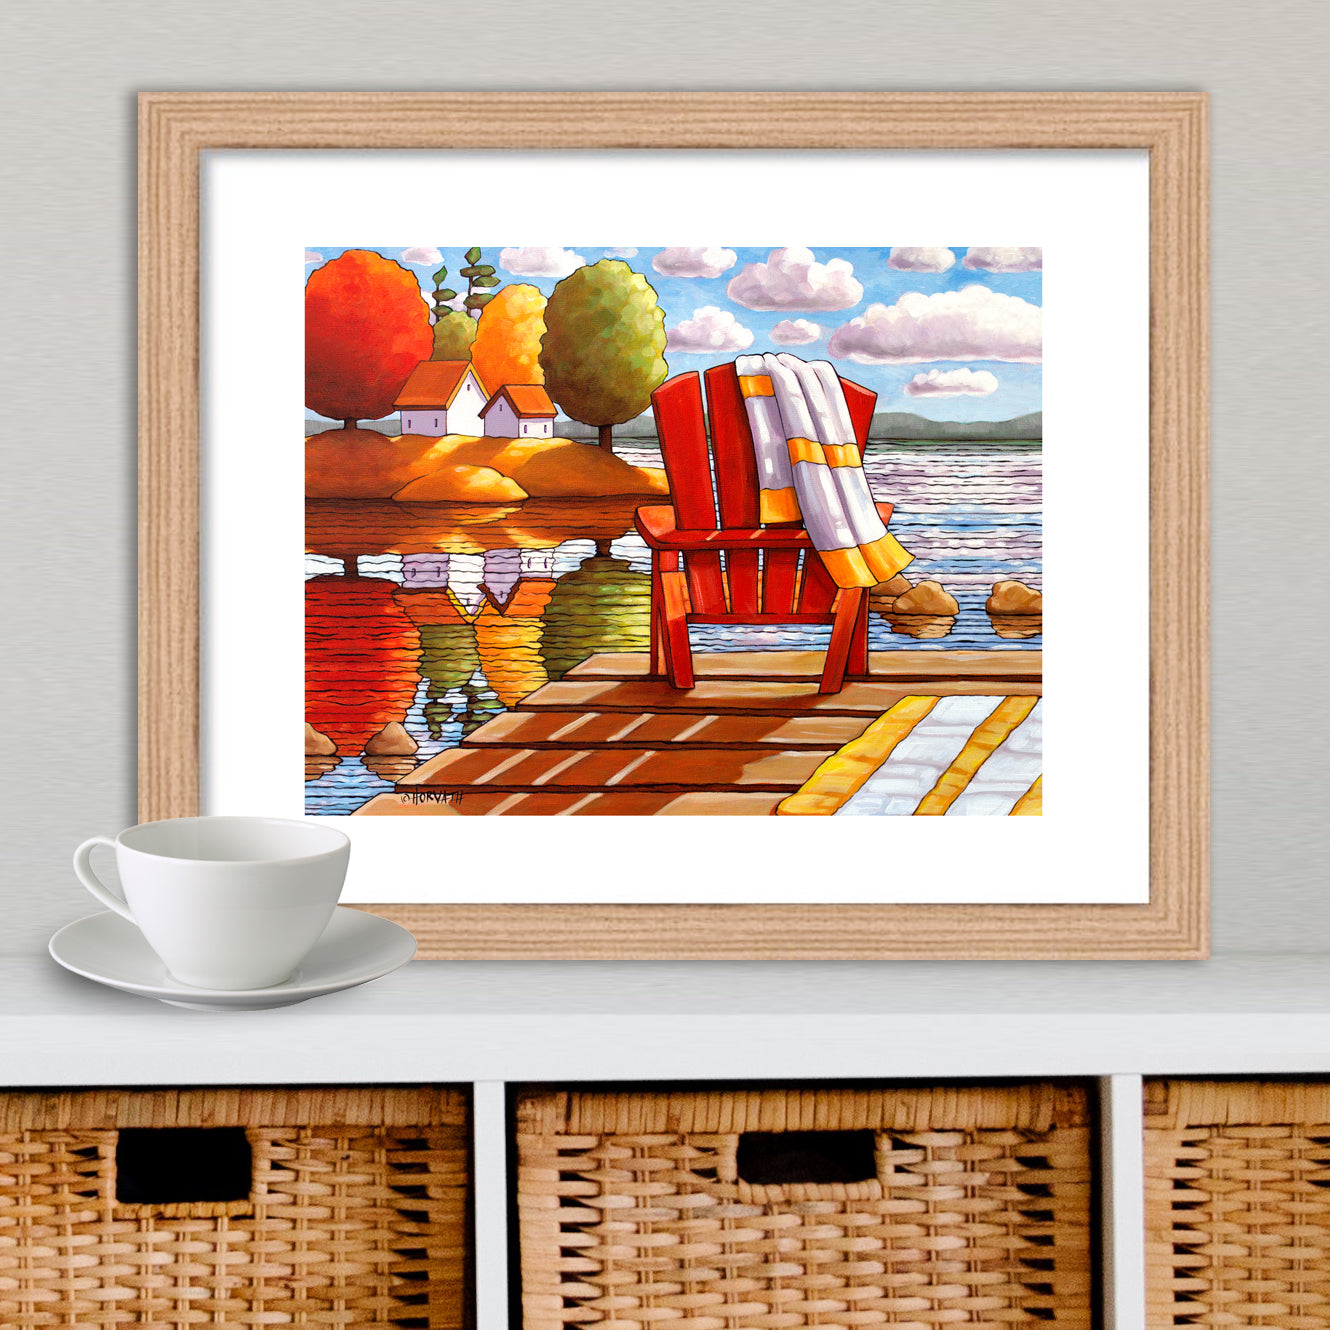 Red Deck Chair View - Art Print by Cathy Horvath Buchanan